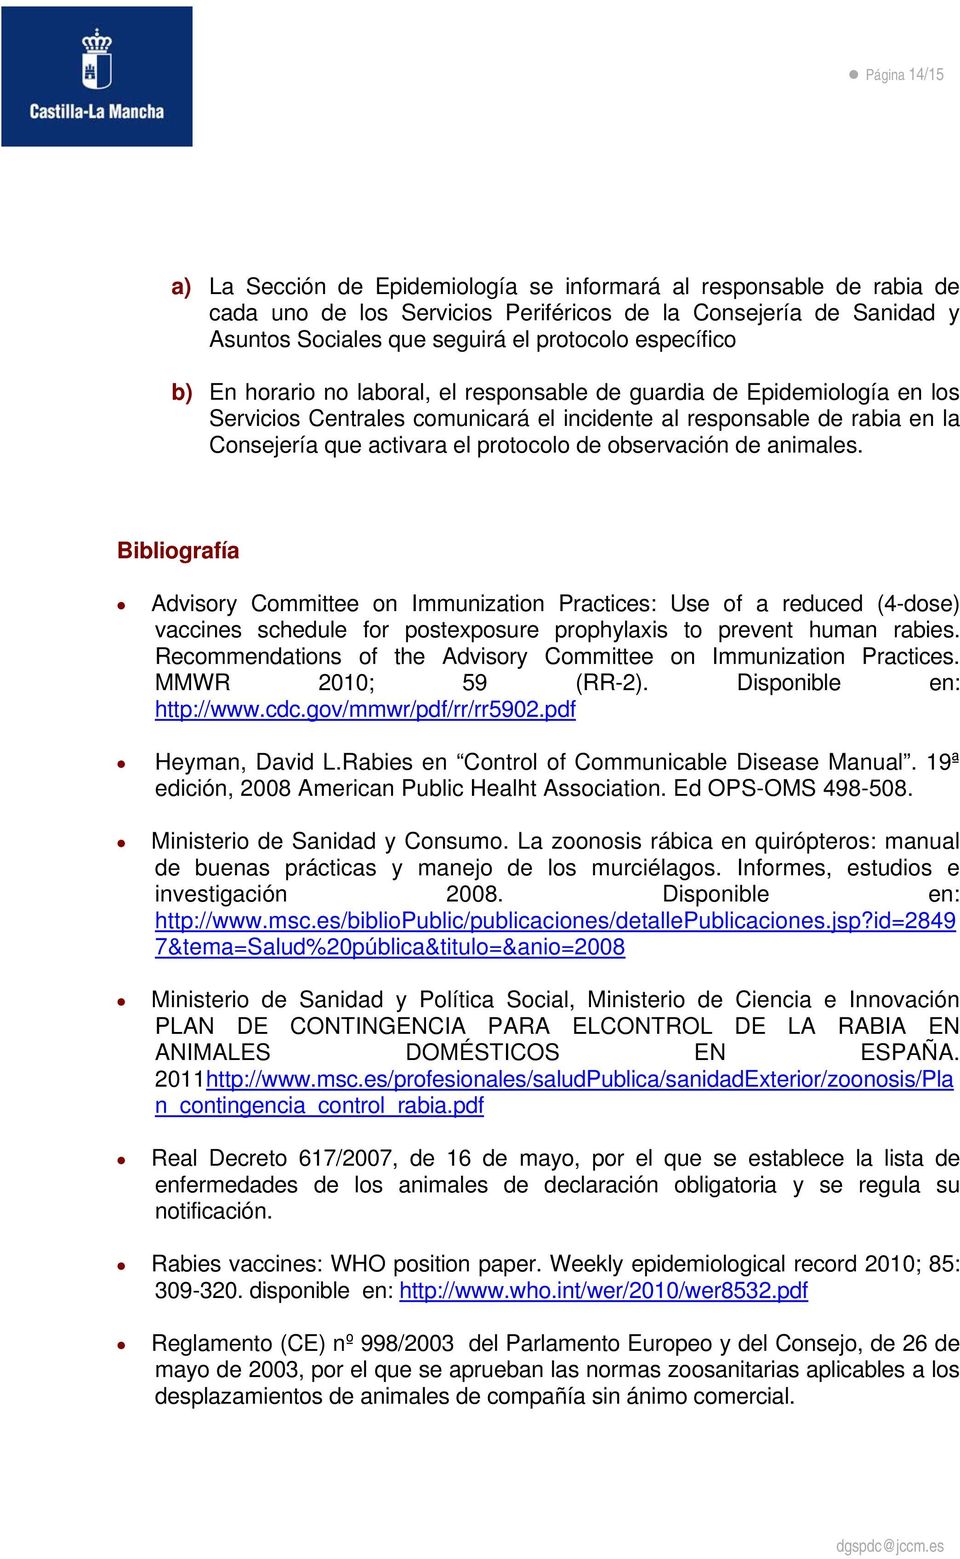 de observación de animales. Bibliografía Advisory Committee on Immunization Practices: Use of a reduced (4-dose) vaccines schedule for postexposure prophylaxis to prevent human rabies.